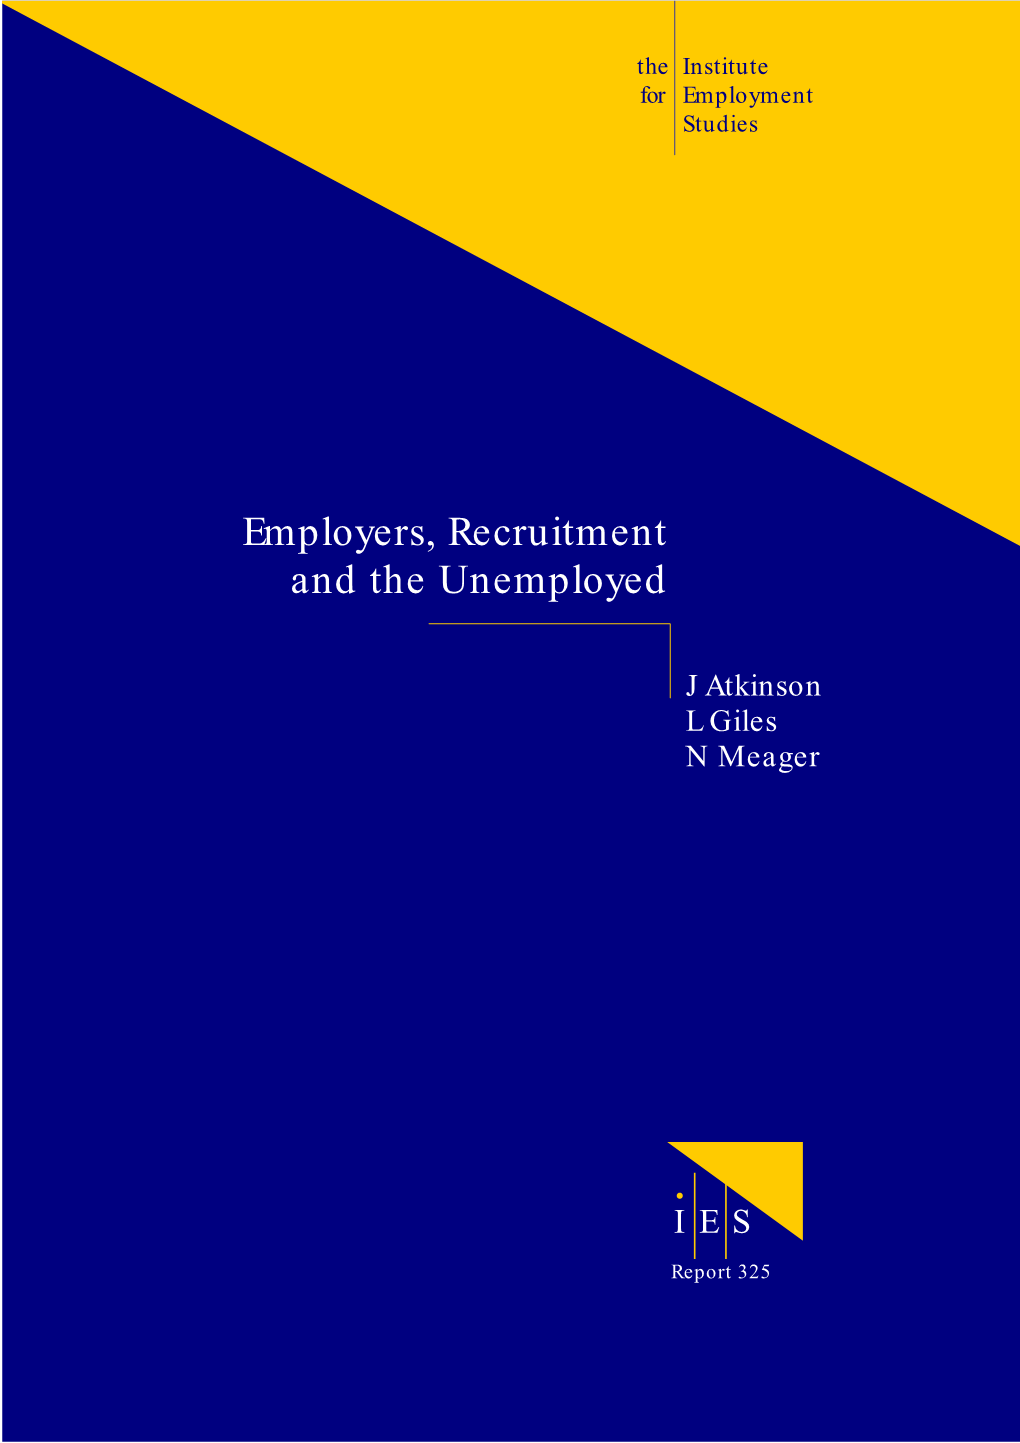 Employers, Recruitment and the Unemployed